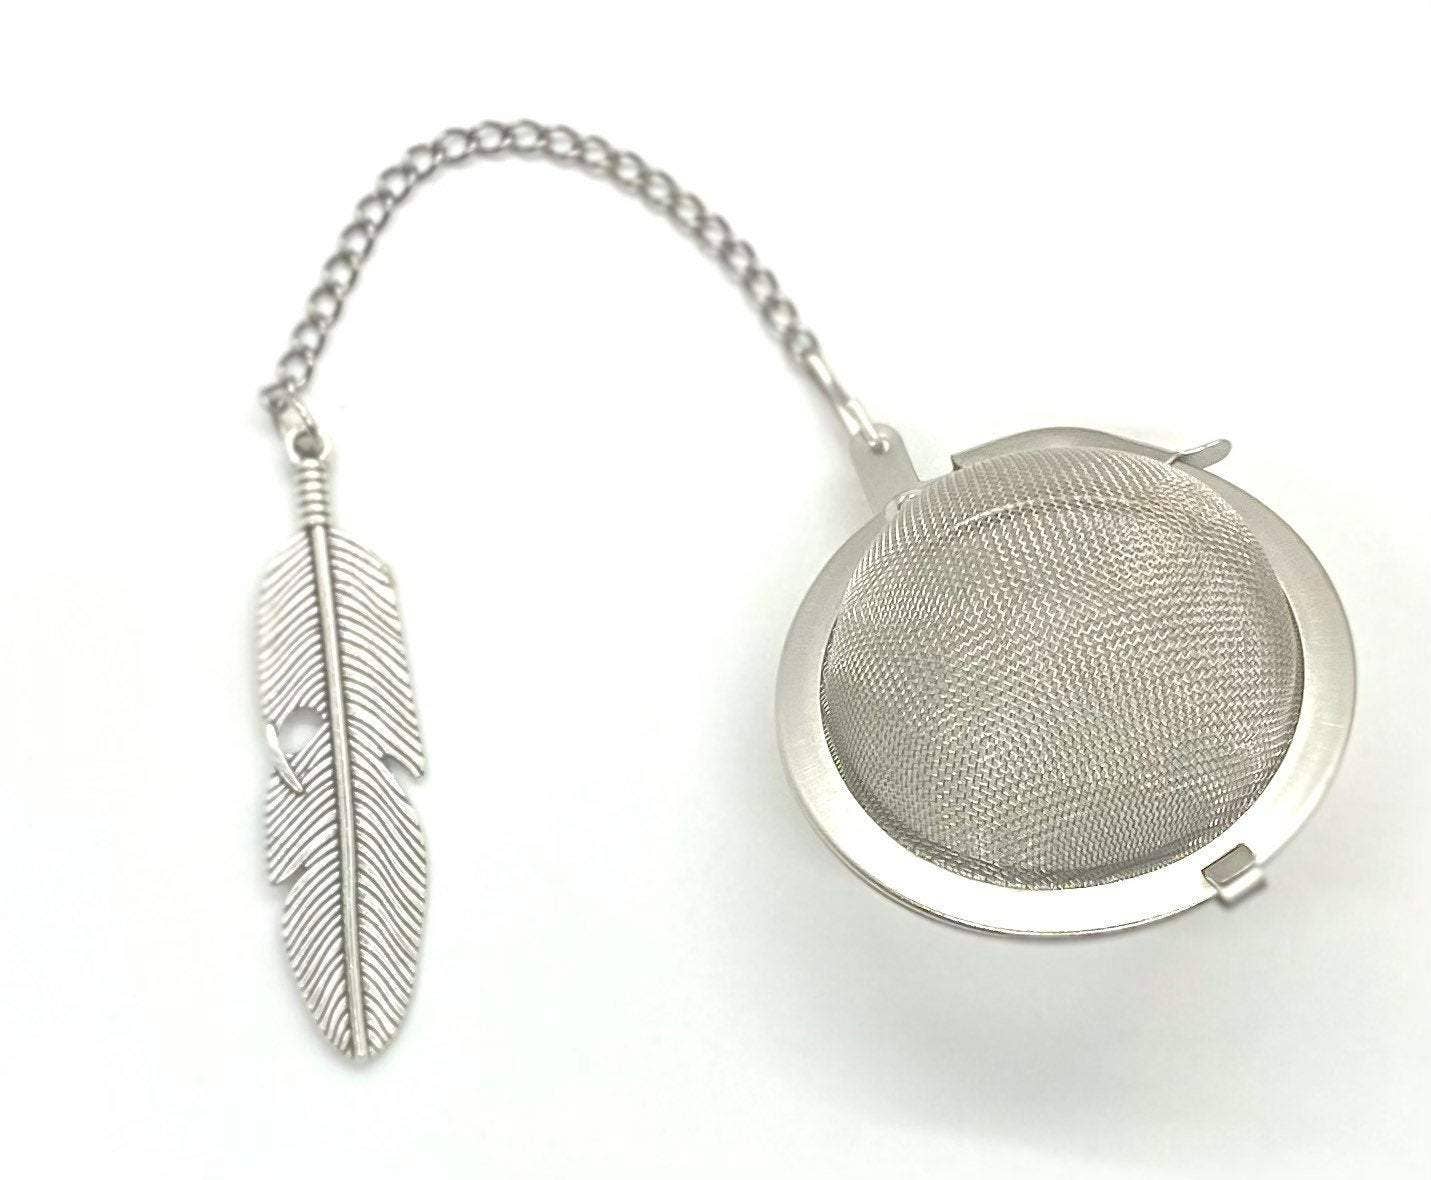 Loose Leaf Tea Infuser, Feather Charm Ball, Tea Lover Gift